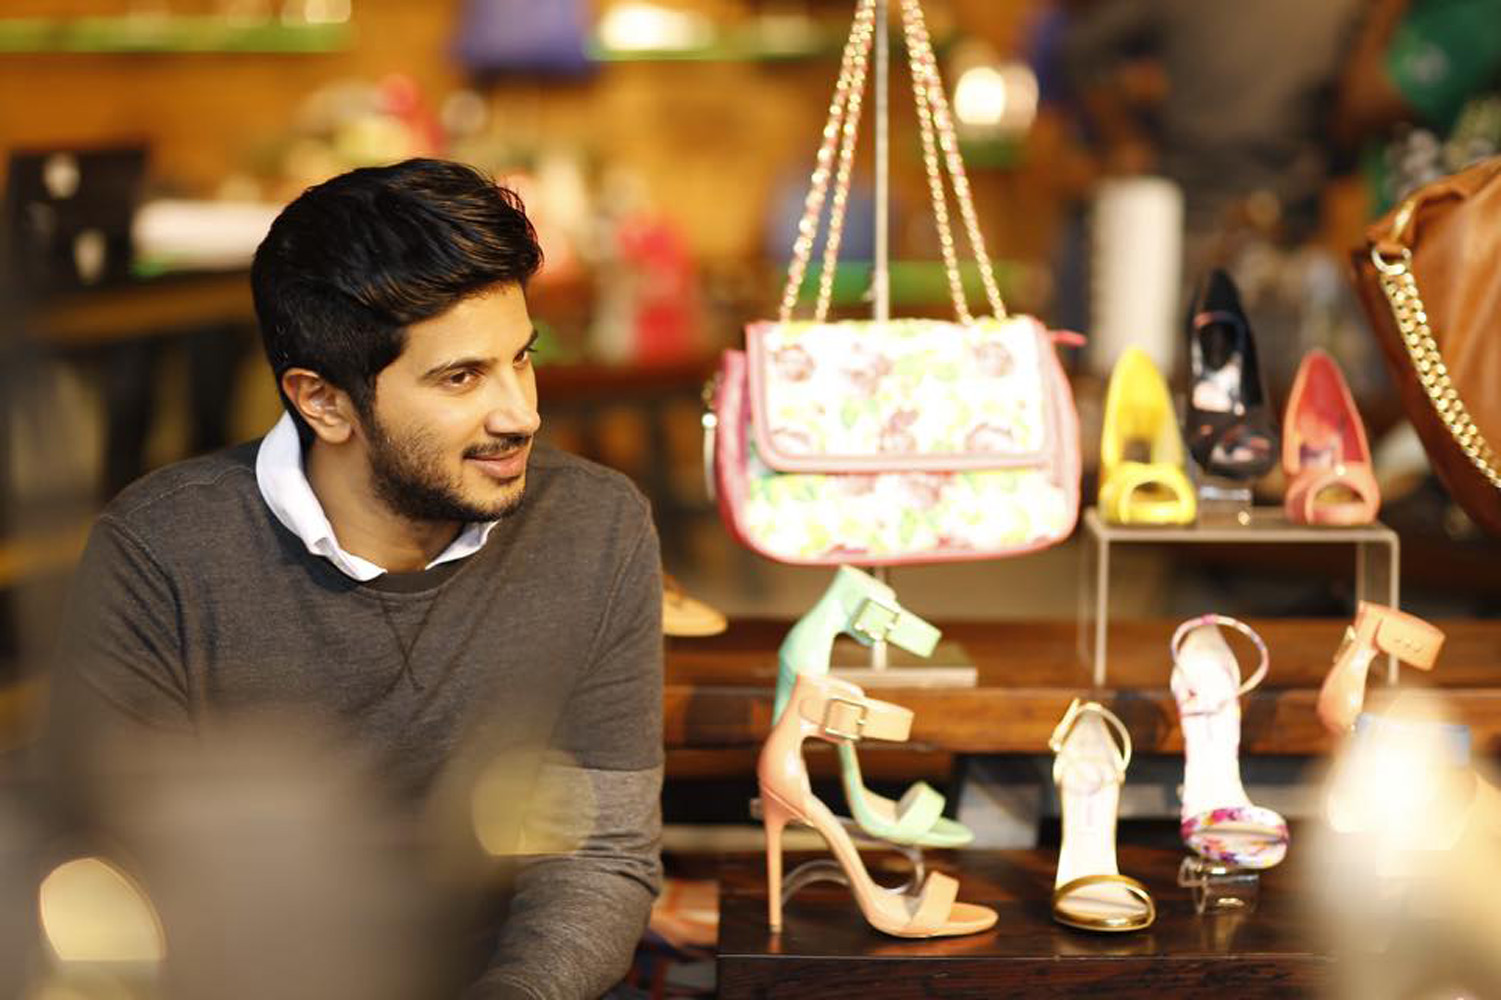 https://onlookersmedia.in/wp-content/uploads/2015/03/100-Days-Of-Love-Stills-Photos-Images-Dulquer-Salmaan-Nithya-Menon-Malayalam-Movies-2015-Onlookers-Media-27.jpg